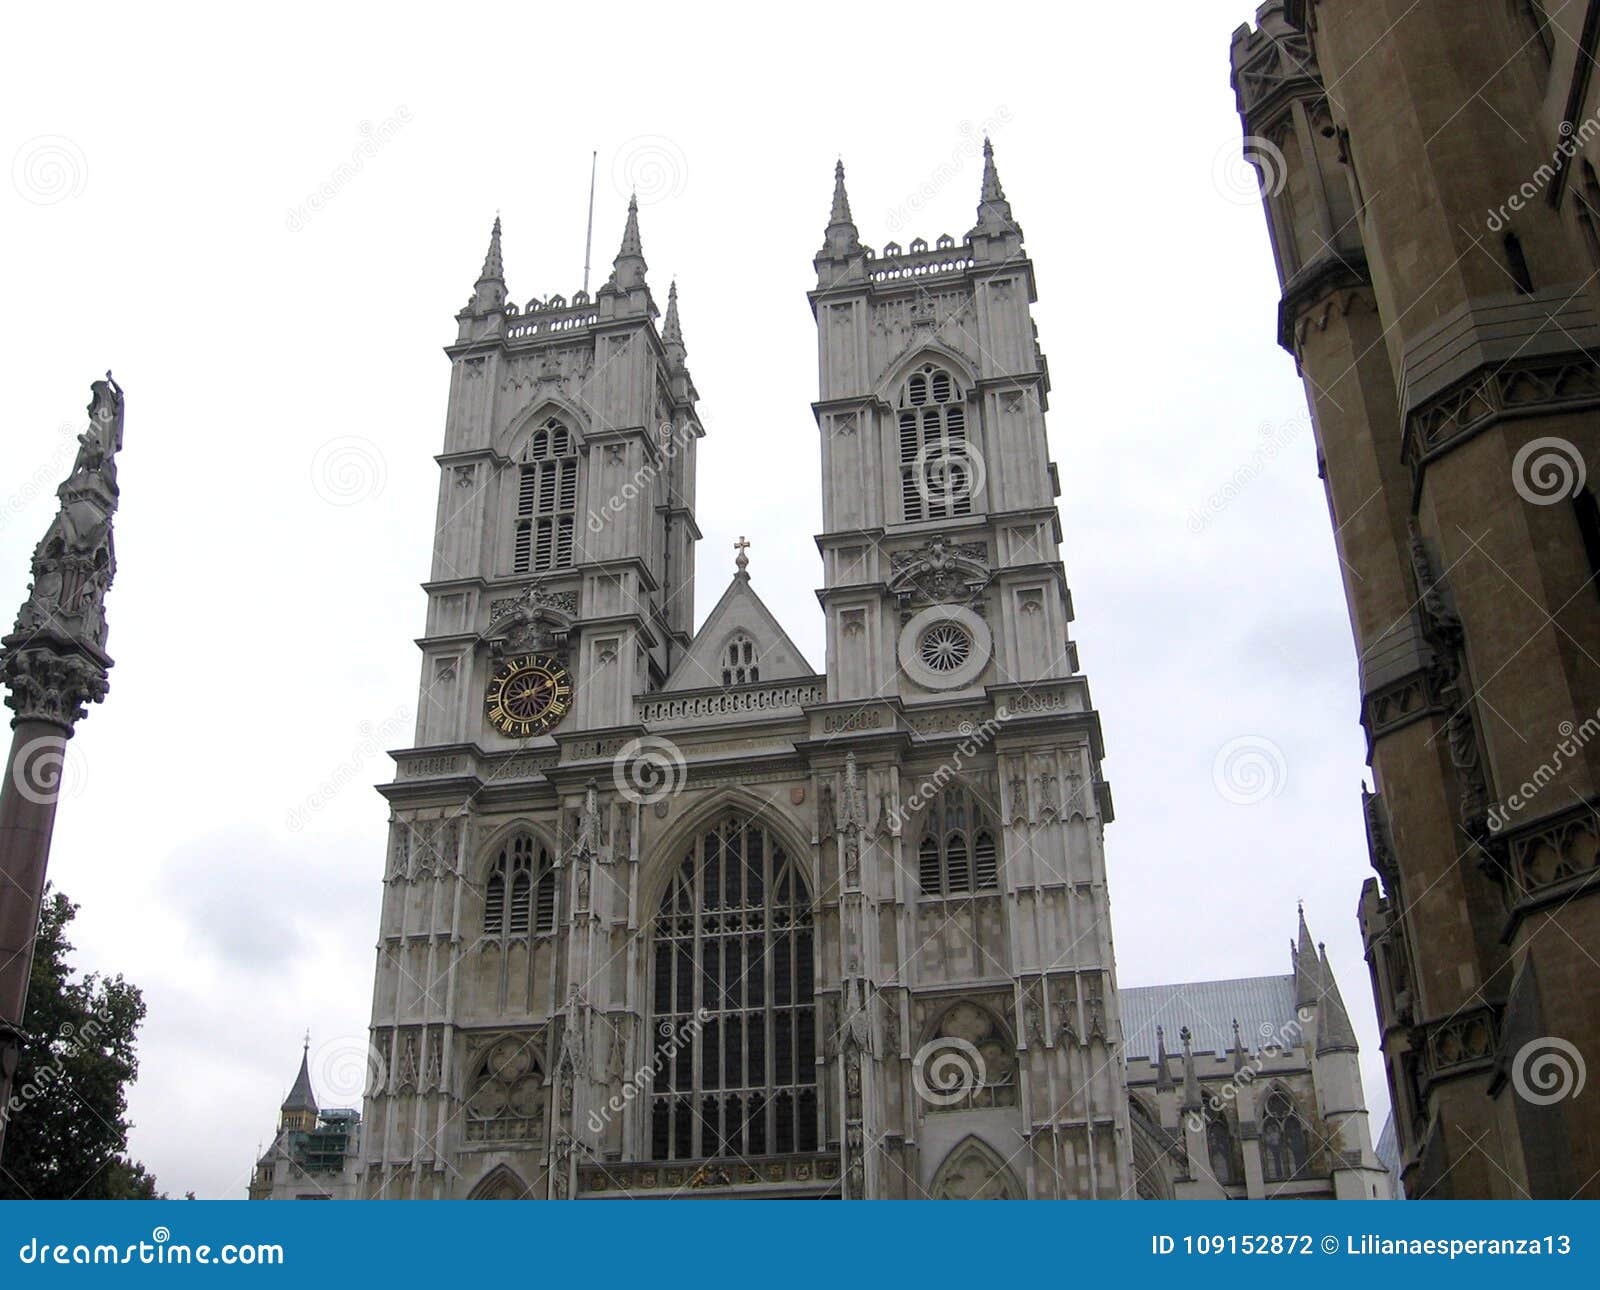 westminster abbey next to the palace of westminster. london reino unido